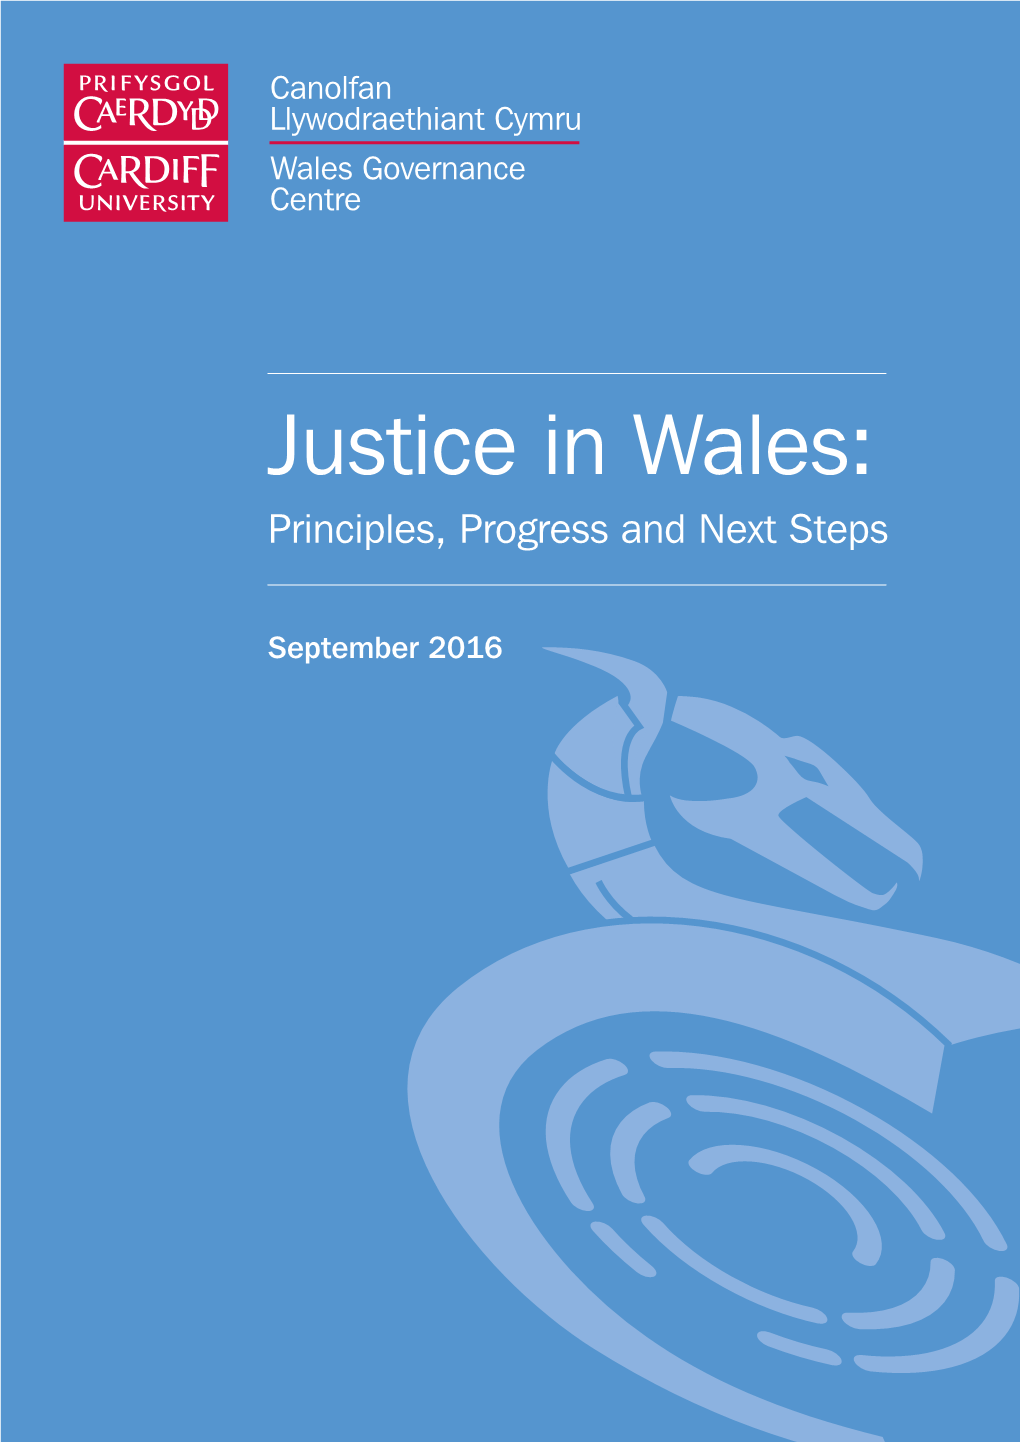 Justice in Wales: Principles, Progress and Next Steps